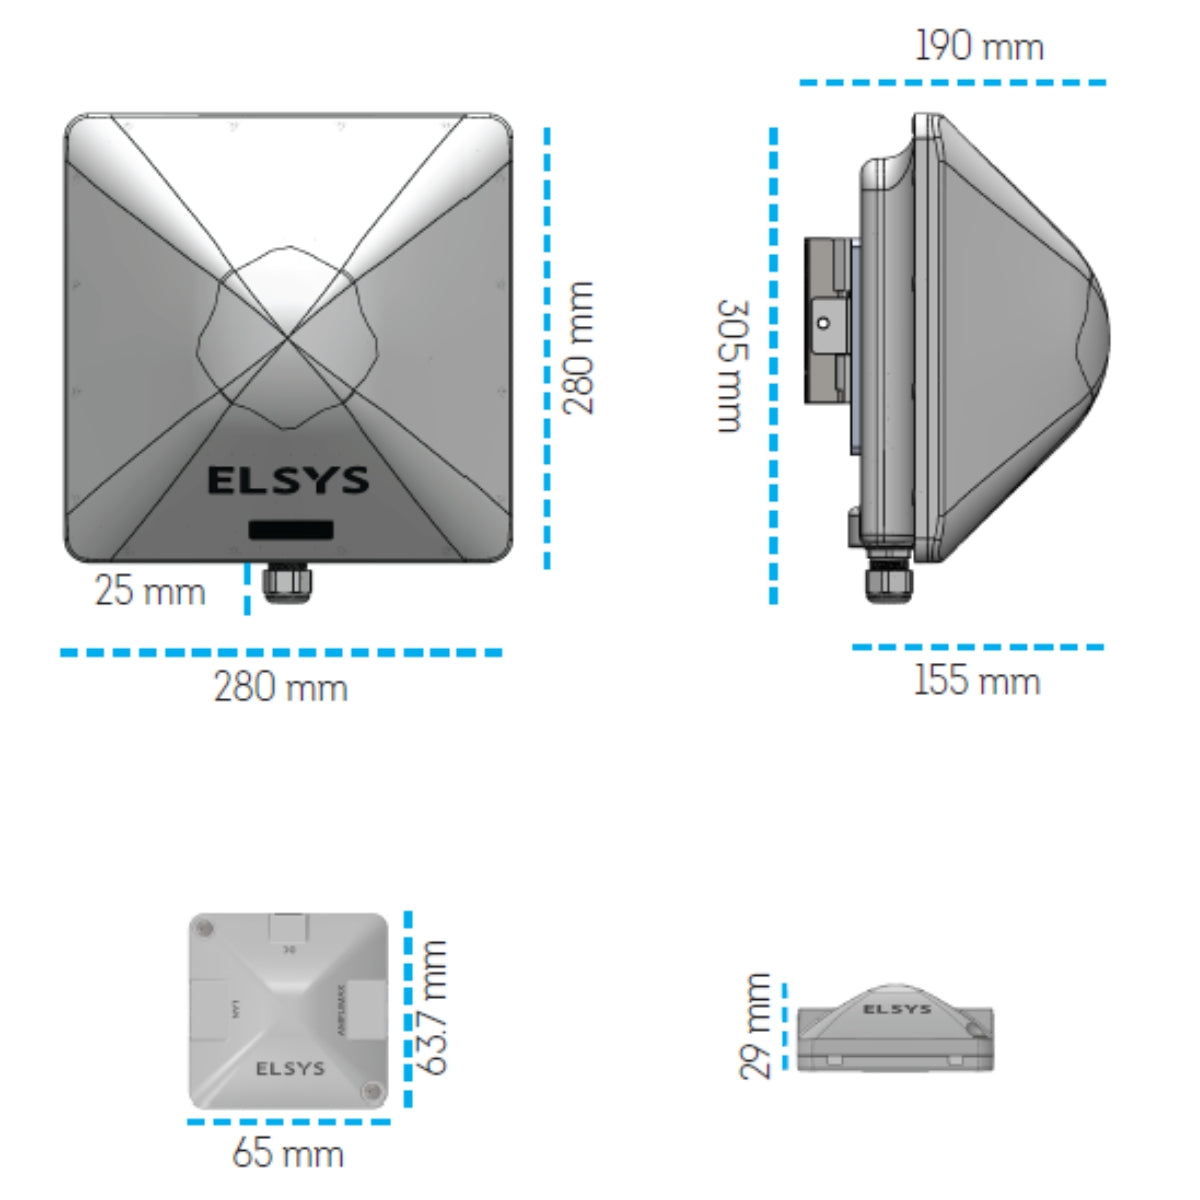 Elsys Amplimax Ultra 5G Outdoor CPE and Directional Antenna